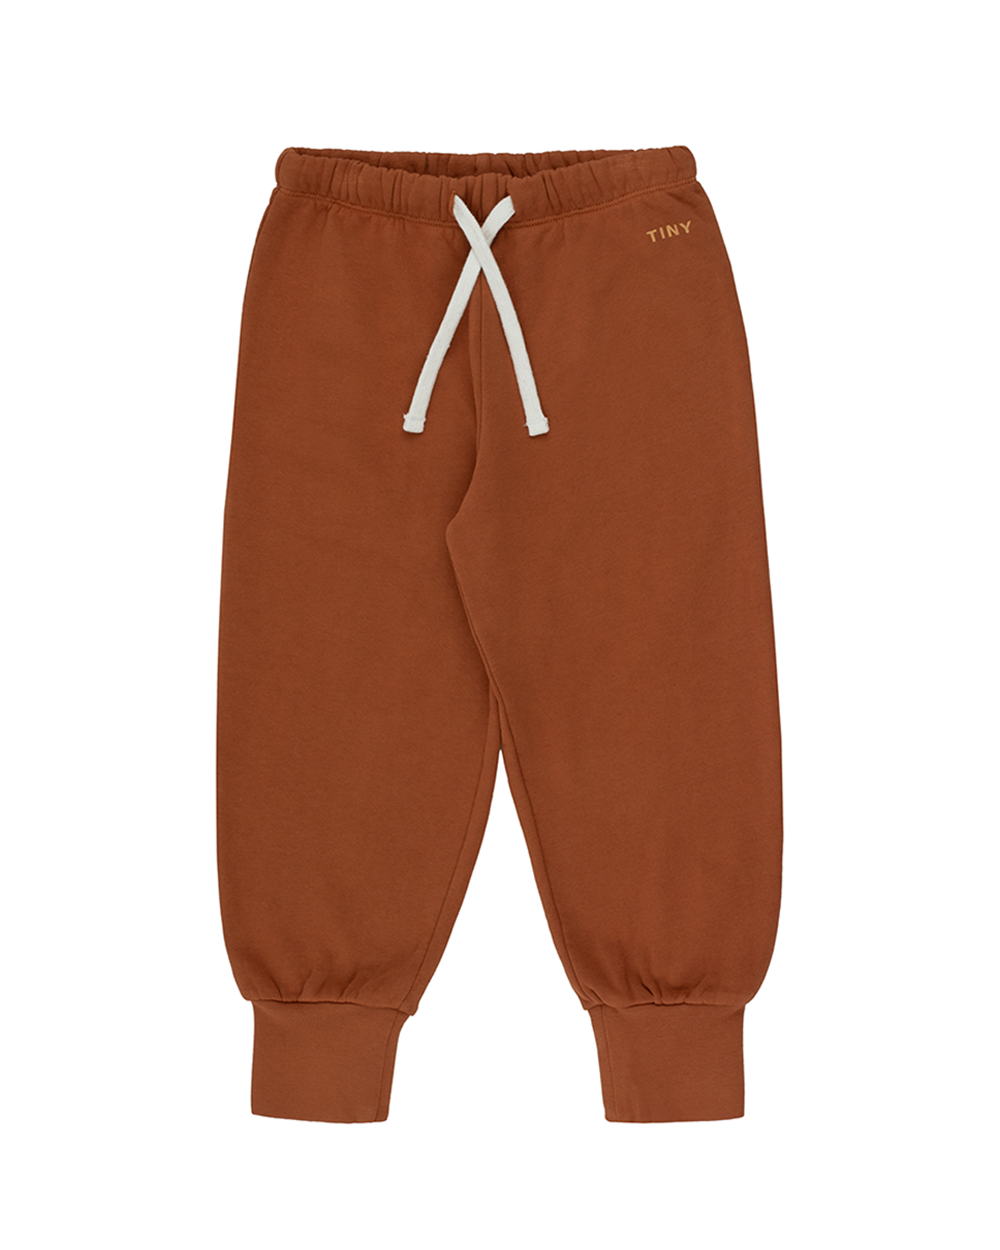 [TINY COTTONS] TINY SWEATPANT brown [4Y]